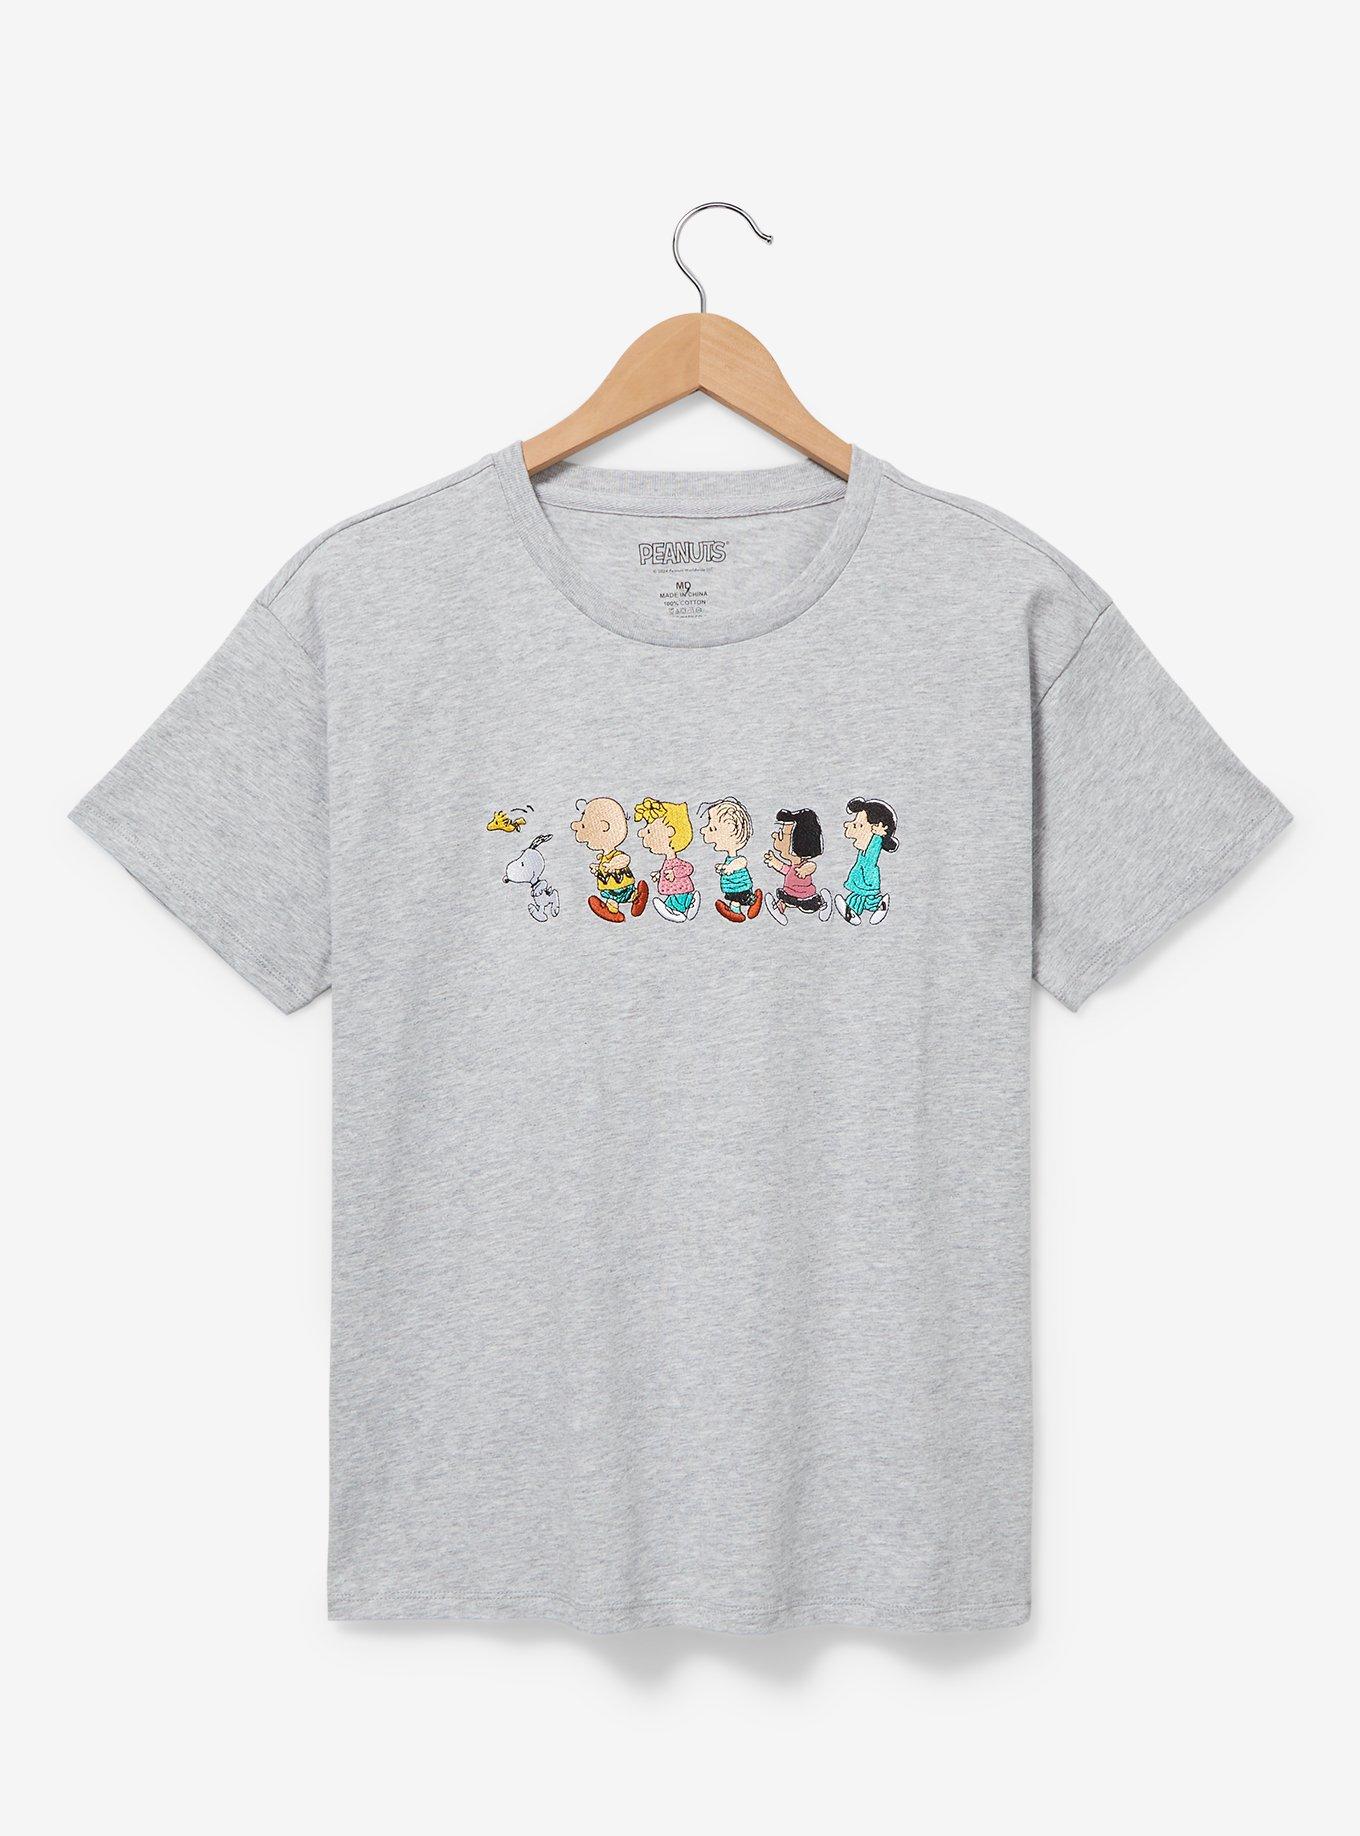 Peanuts Characters Running Women's T-Shirt - BoxLunch Exclusive, HEATHER, hi-res